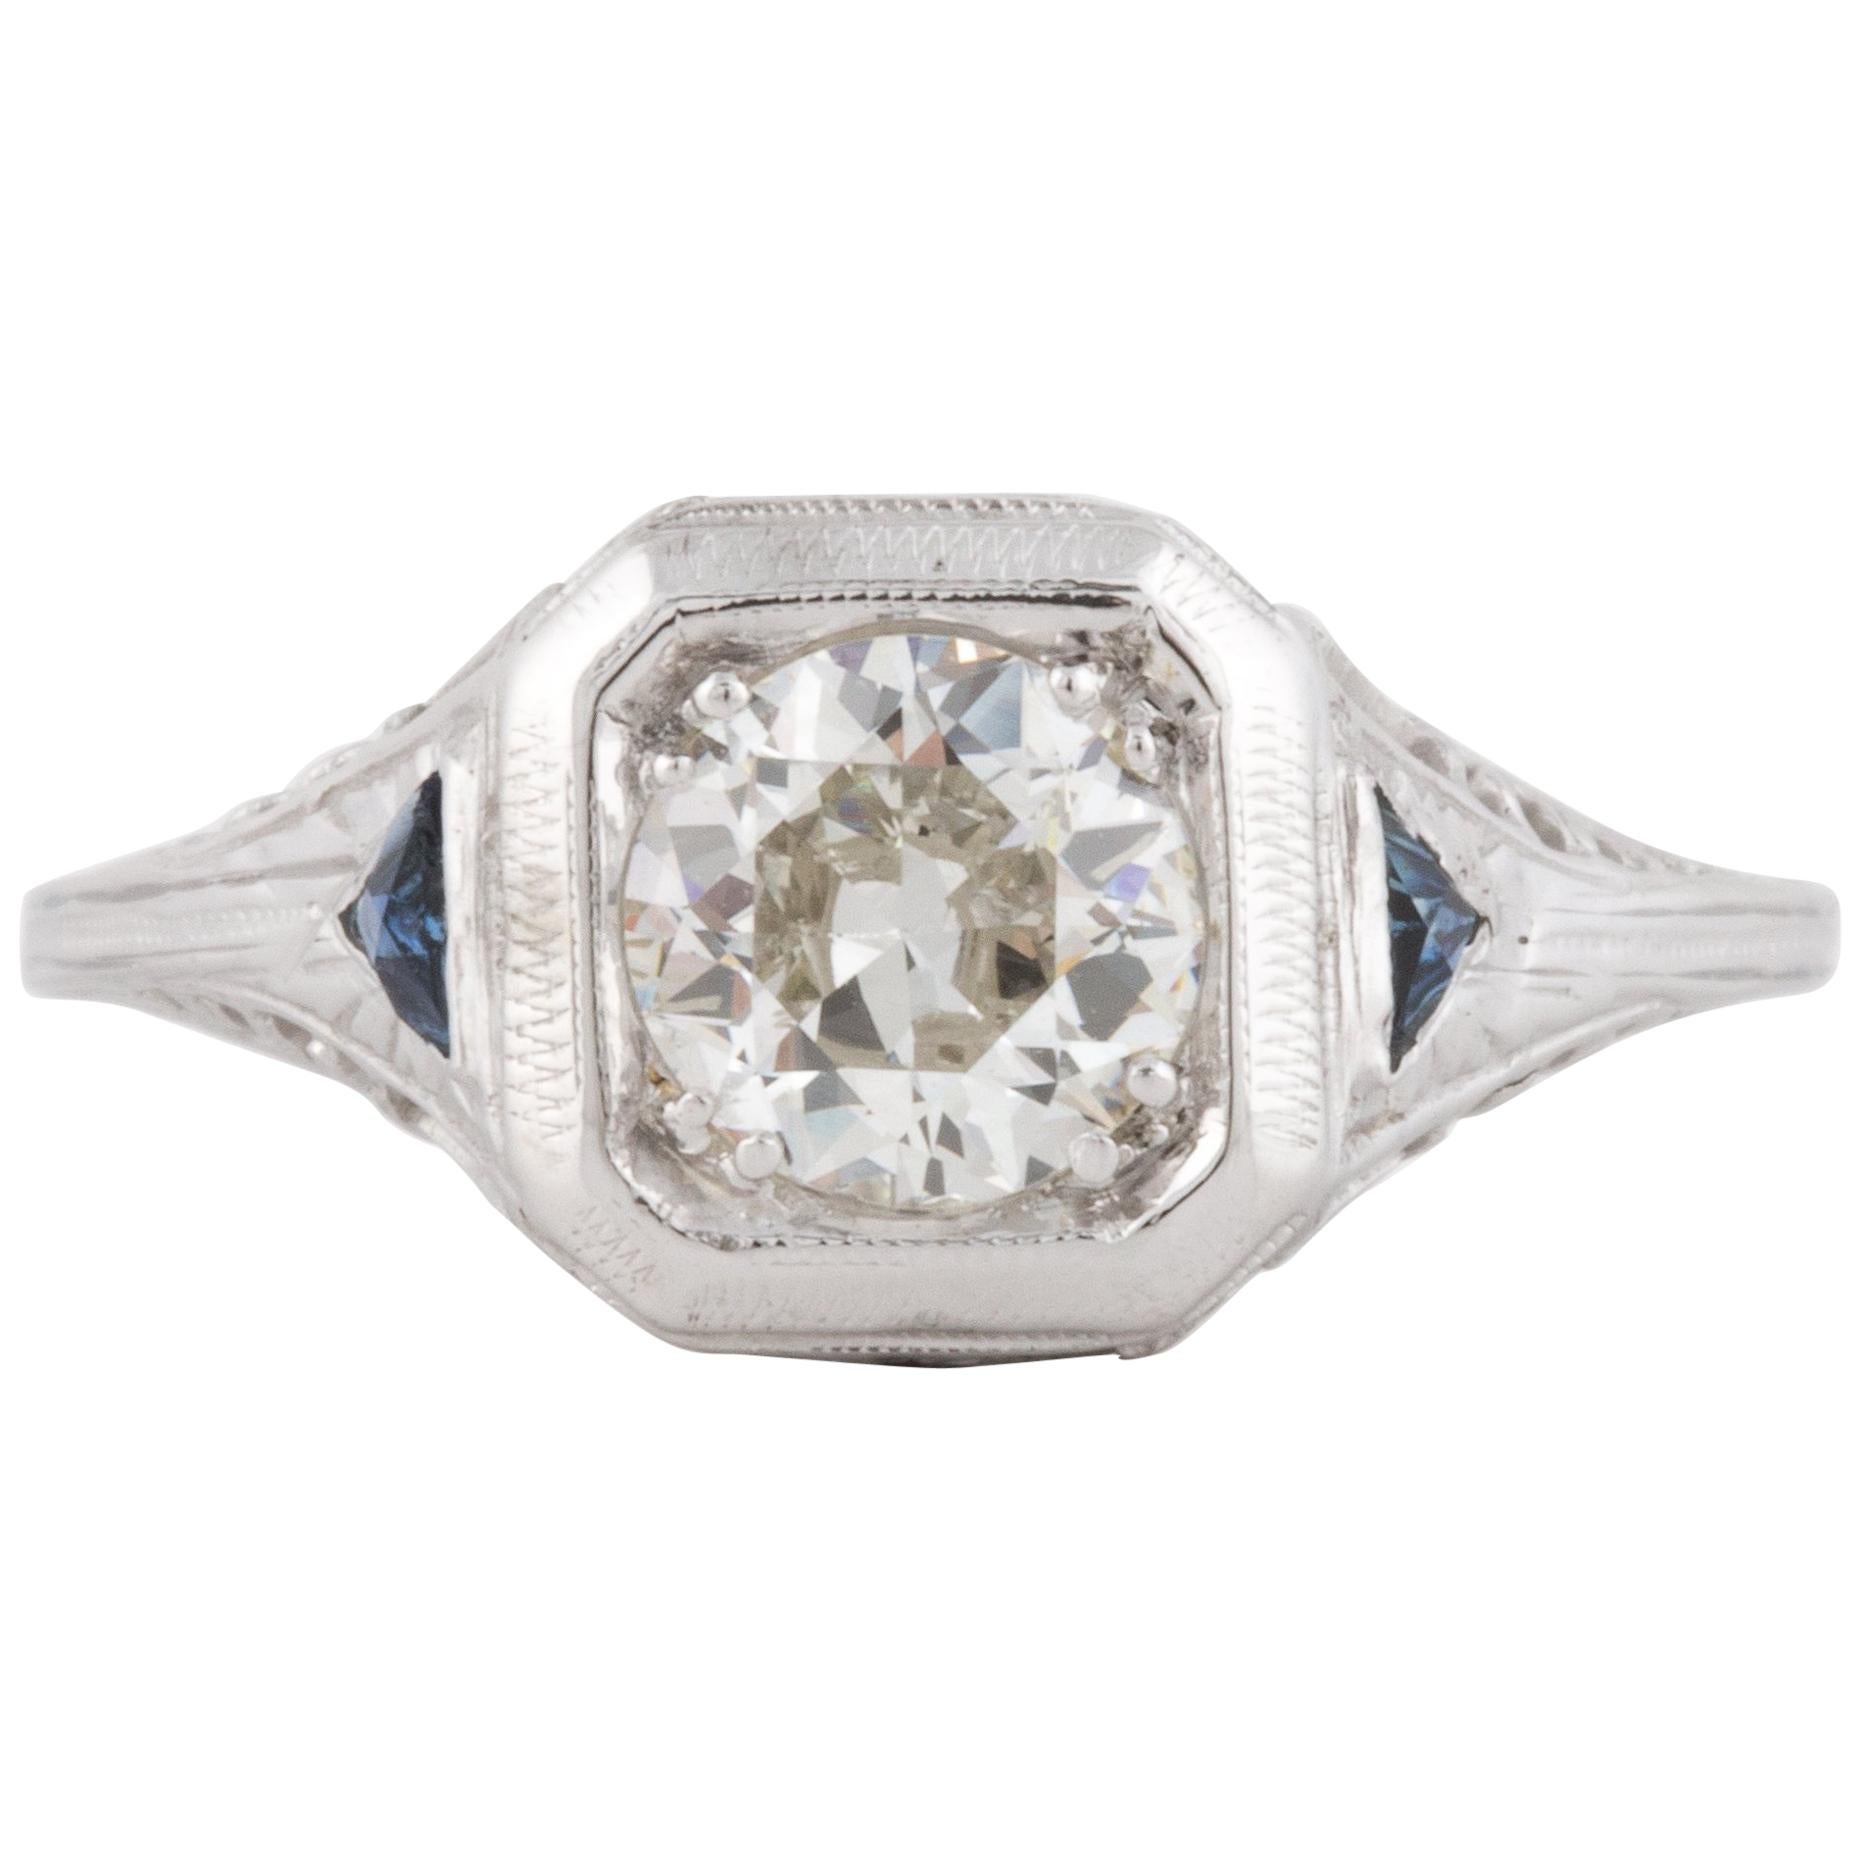 Art Deco 18K White Gold Diamond Engagement Ring with Sapphire Accents